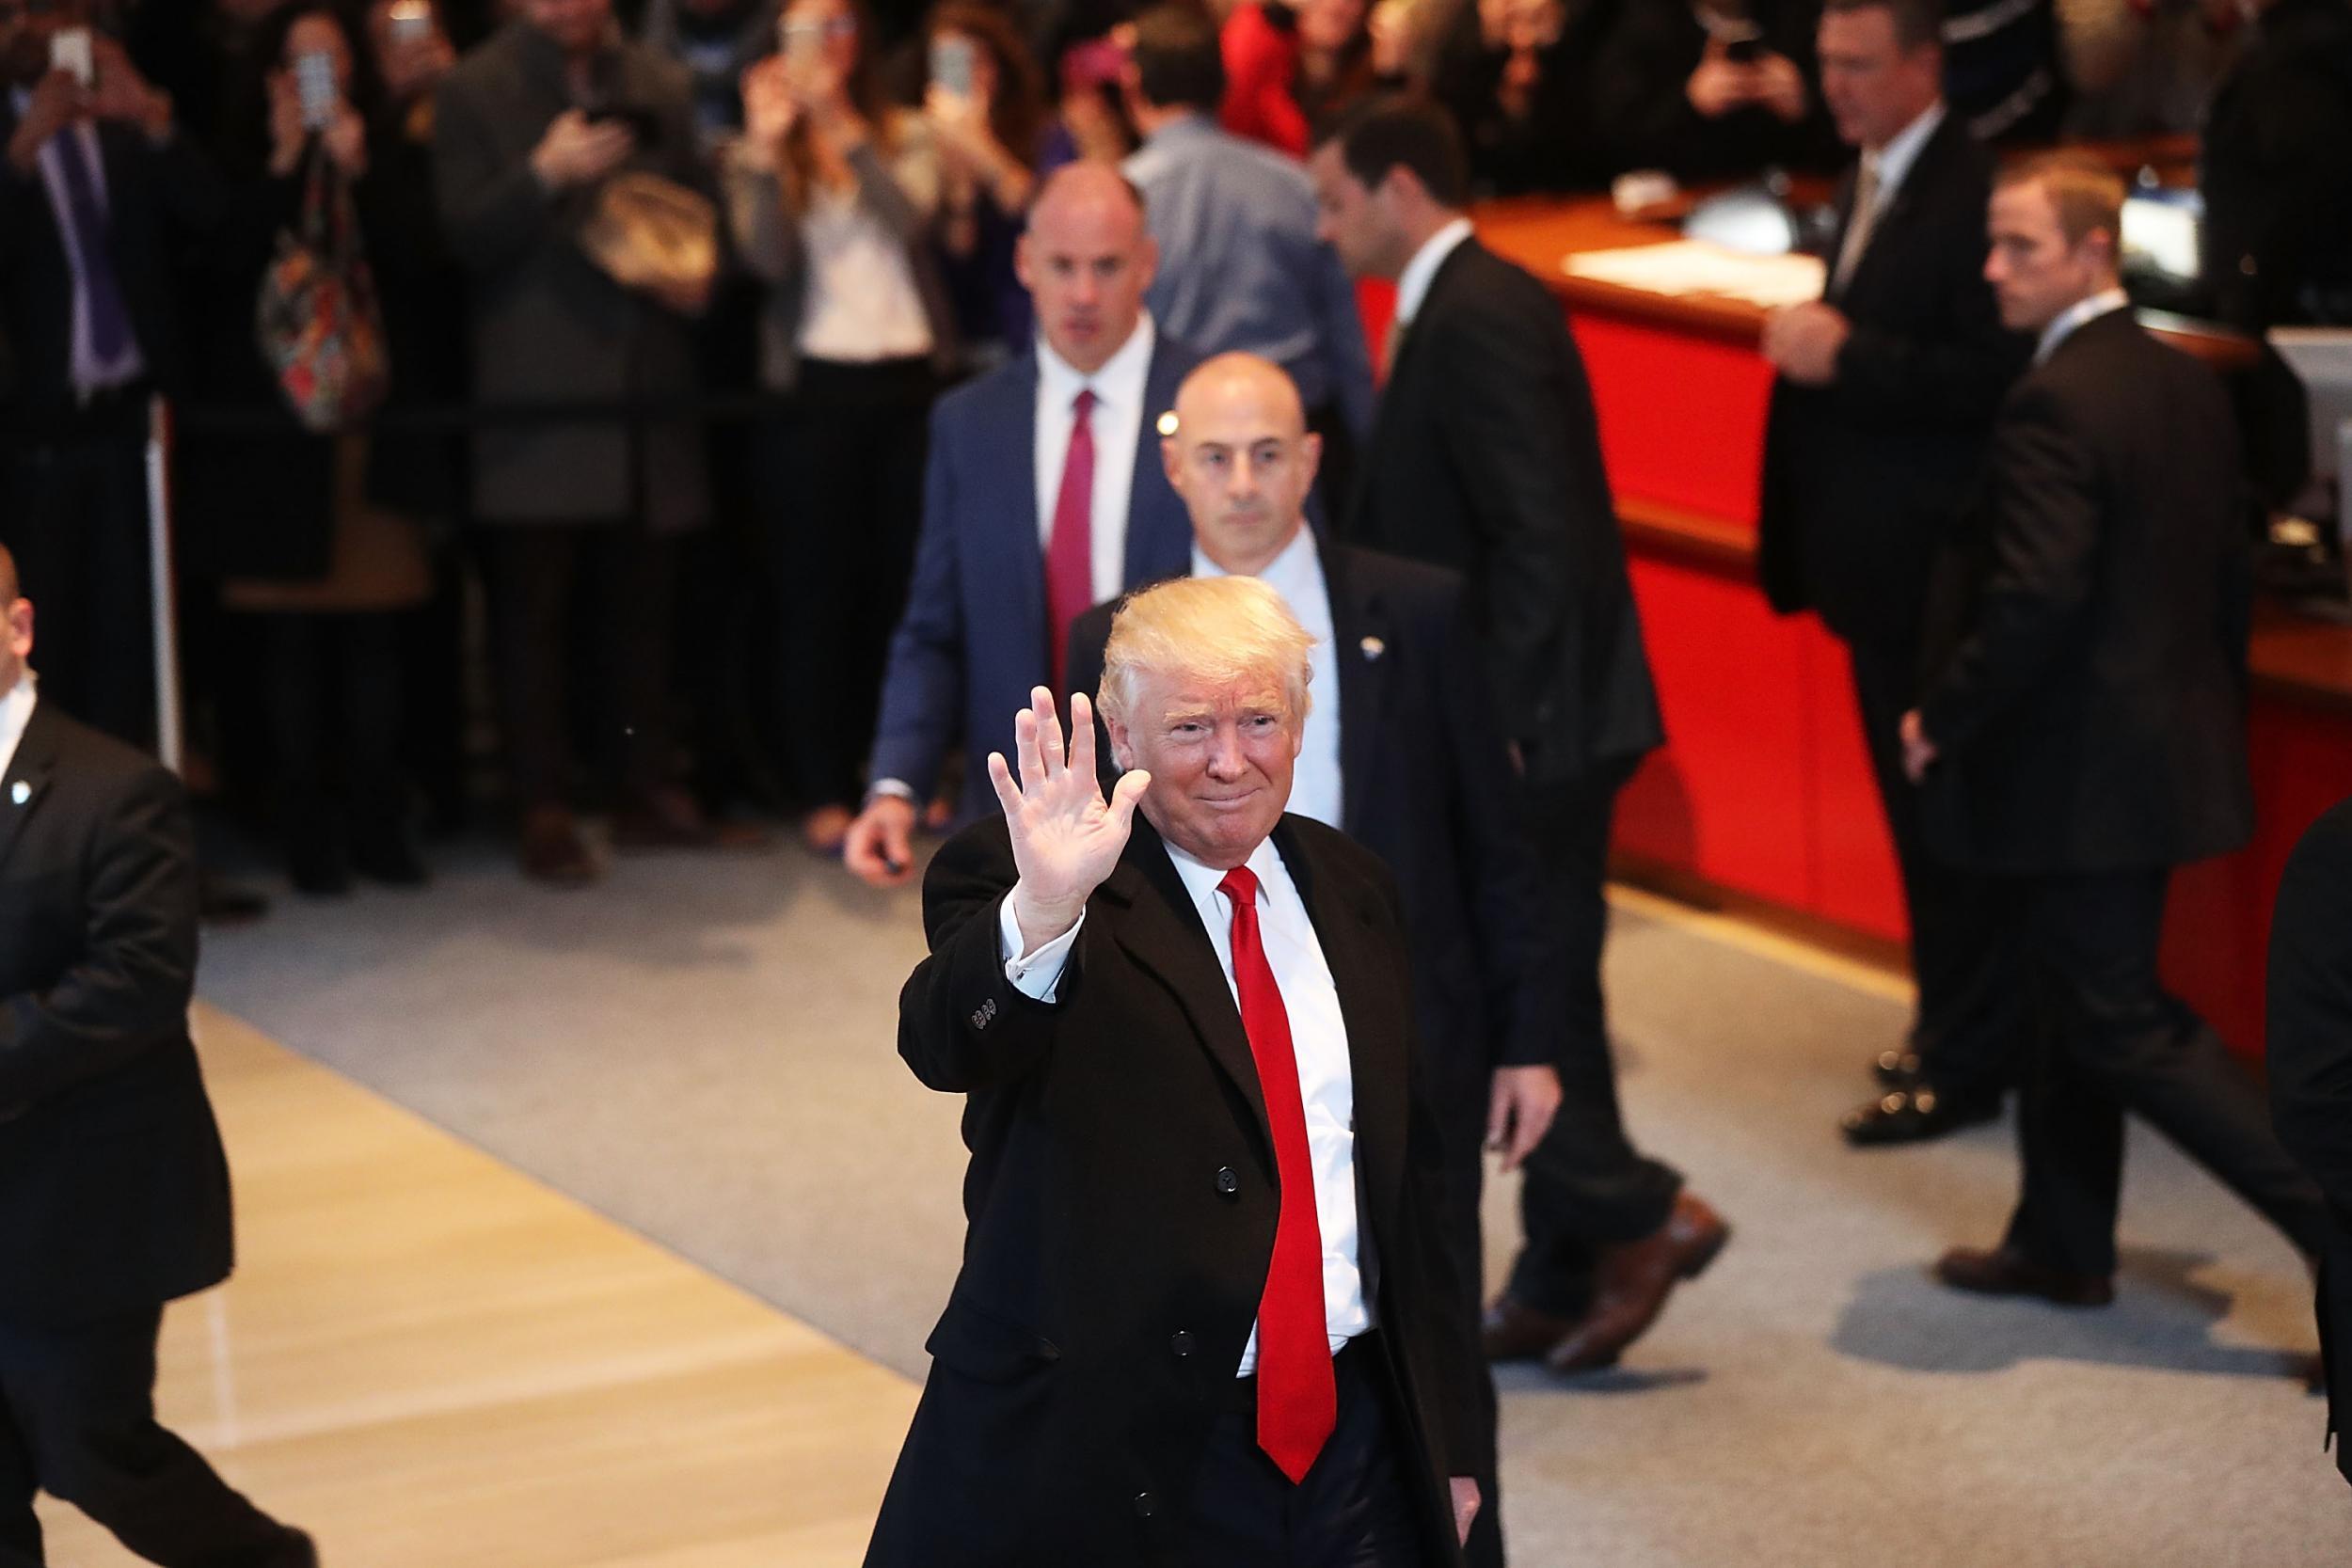 Mr Trump meets reporters, editors and publishers at the New York Times